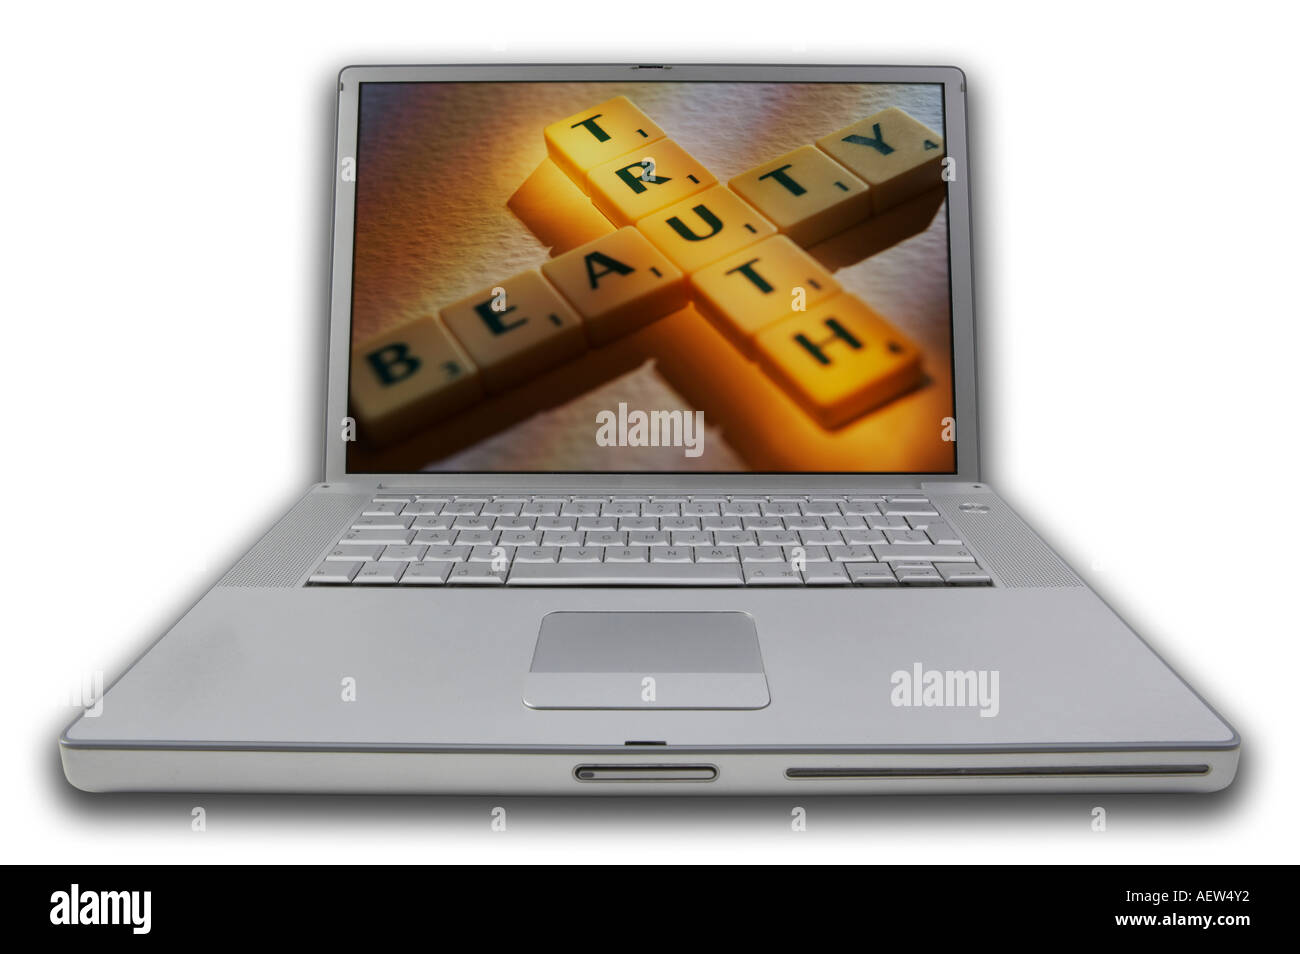 LAP TOP COMPUTER WITH SCRABBLE LETTERS ON SCREEN SPELLING WORDS TRUTH BEAUTY Stock Photo